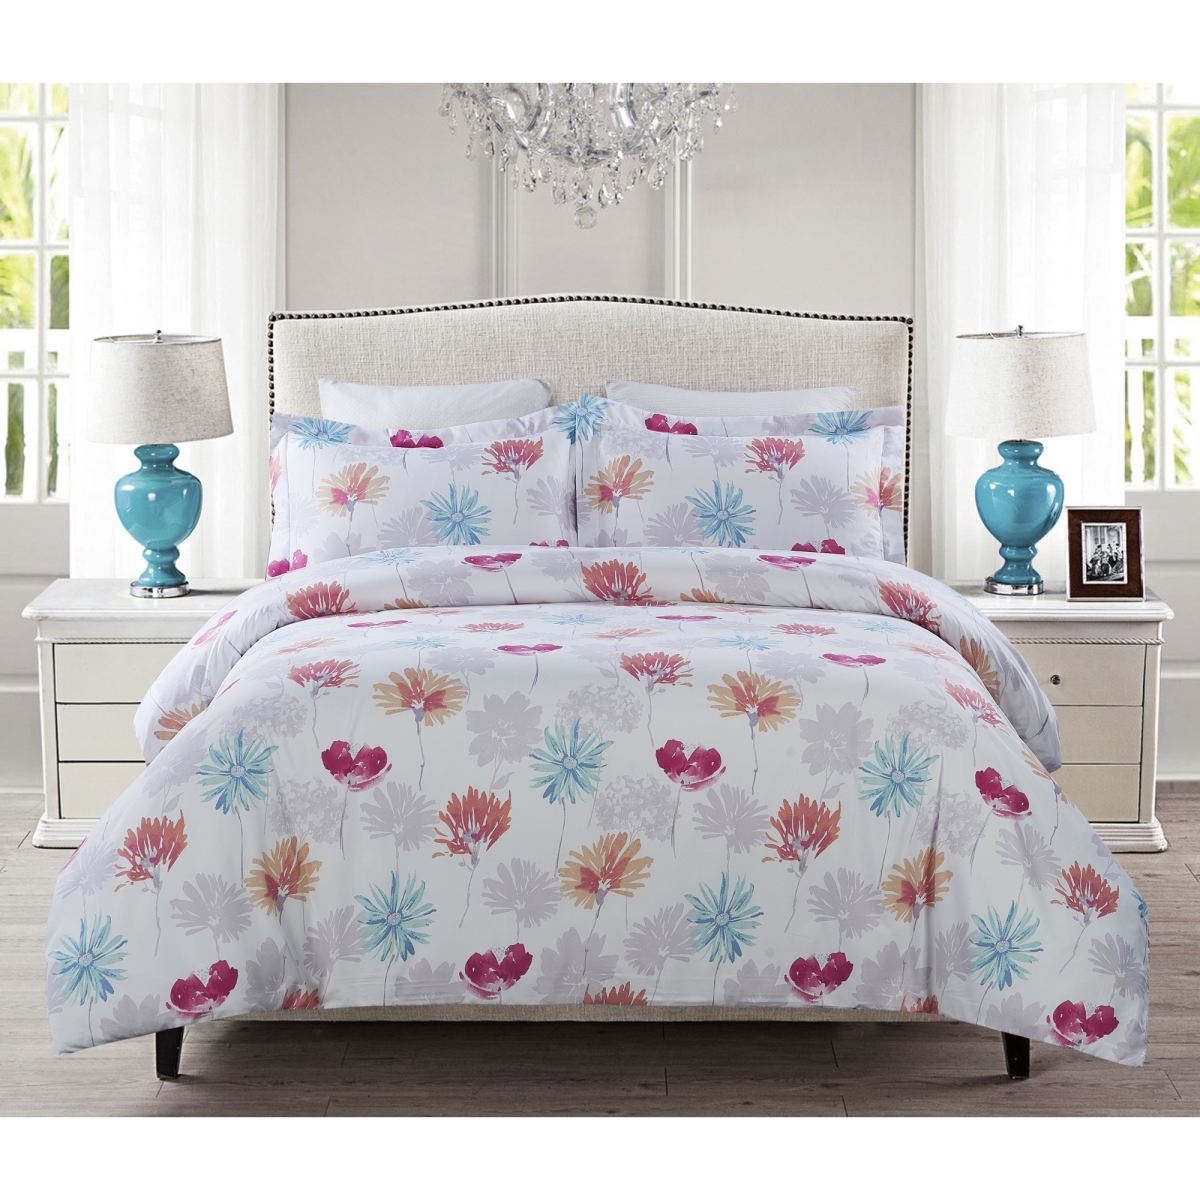 Whtx636-cfk Microfiber Duvet Cover Set With Printed Colored Flowers, King Size - 3 Piece